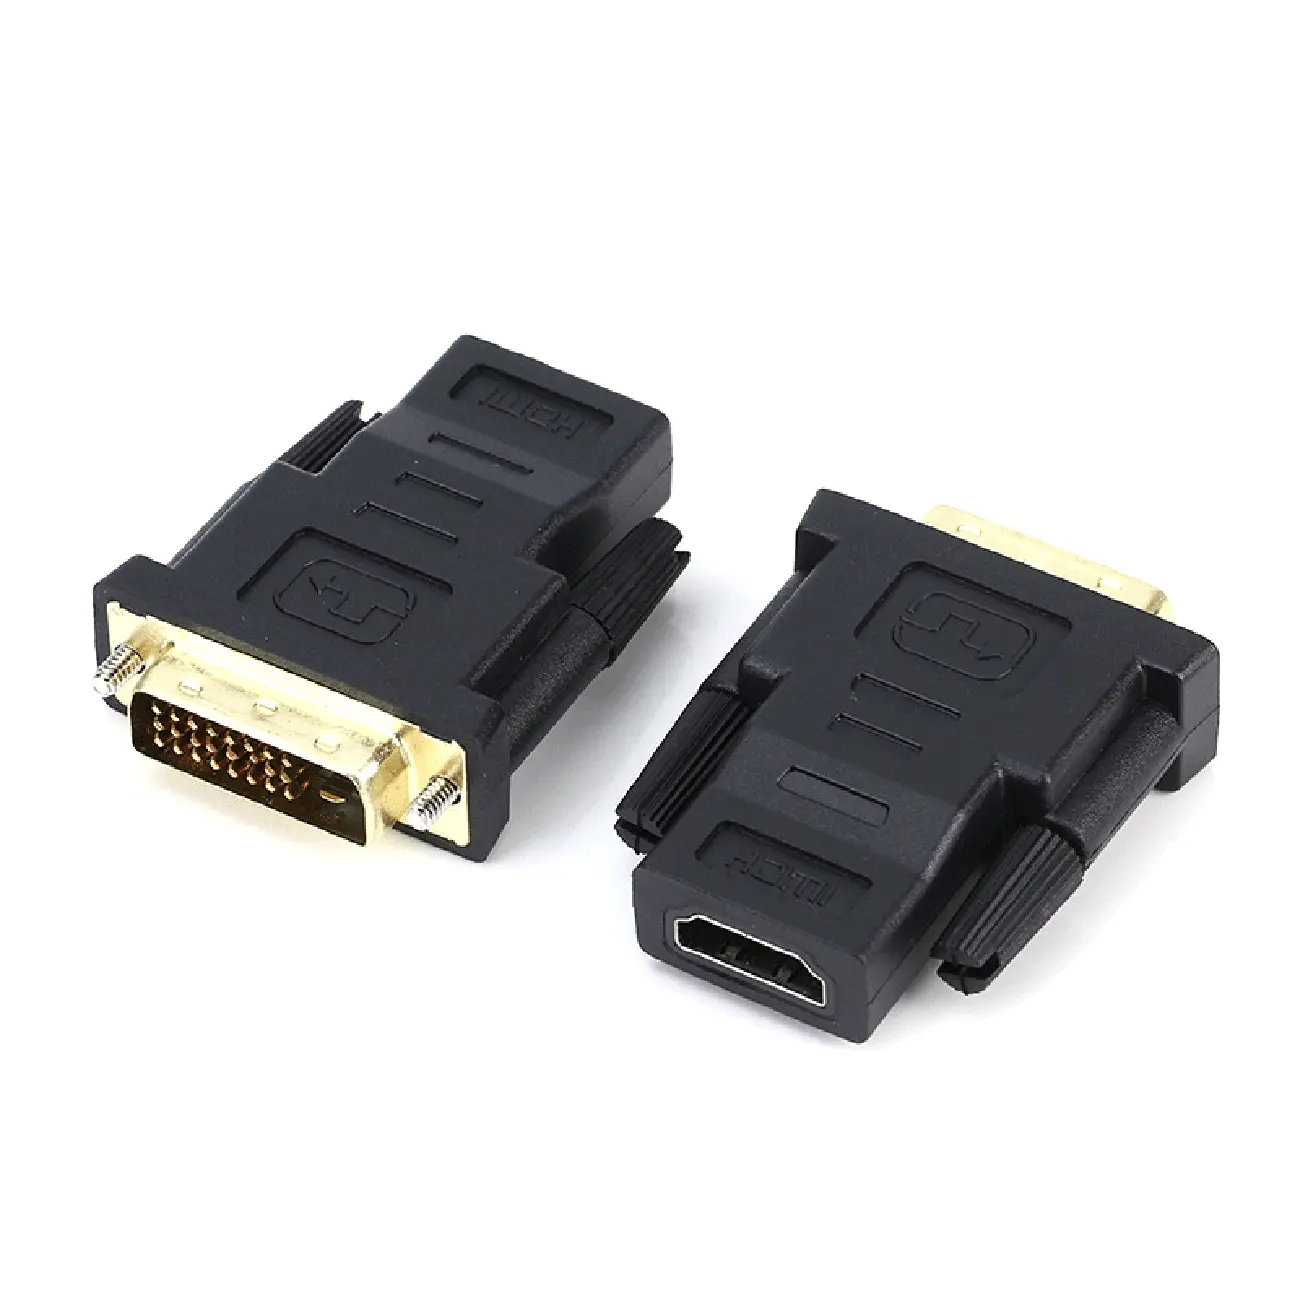 HDMI Female to DVI 24+1 Adapter for TV display